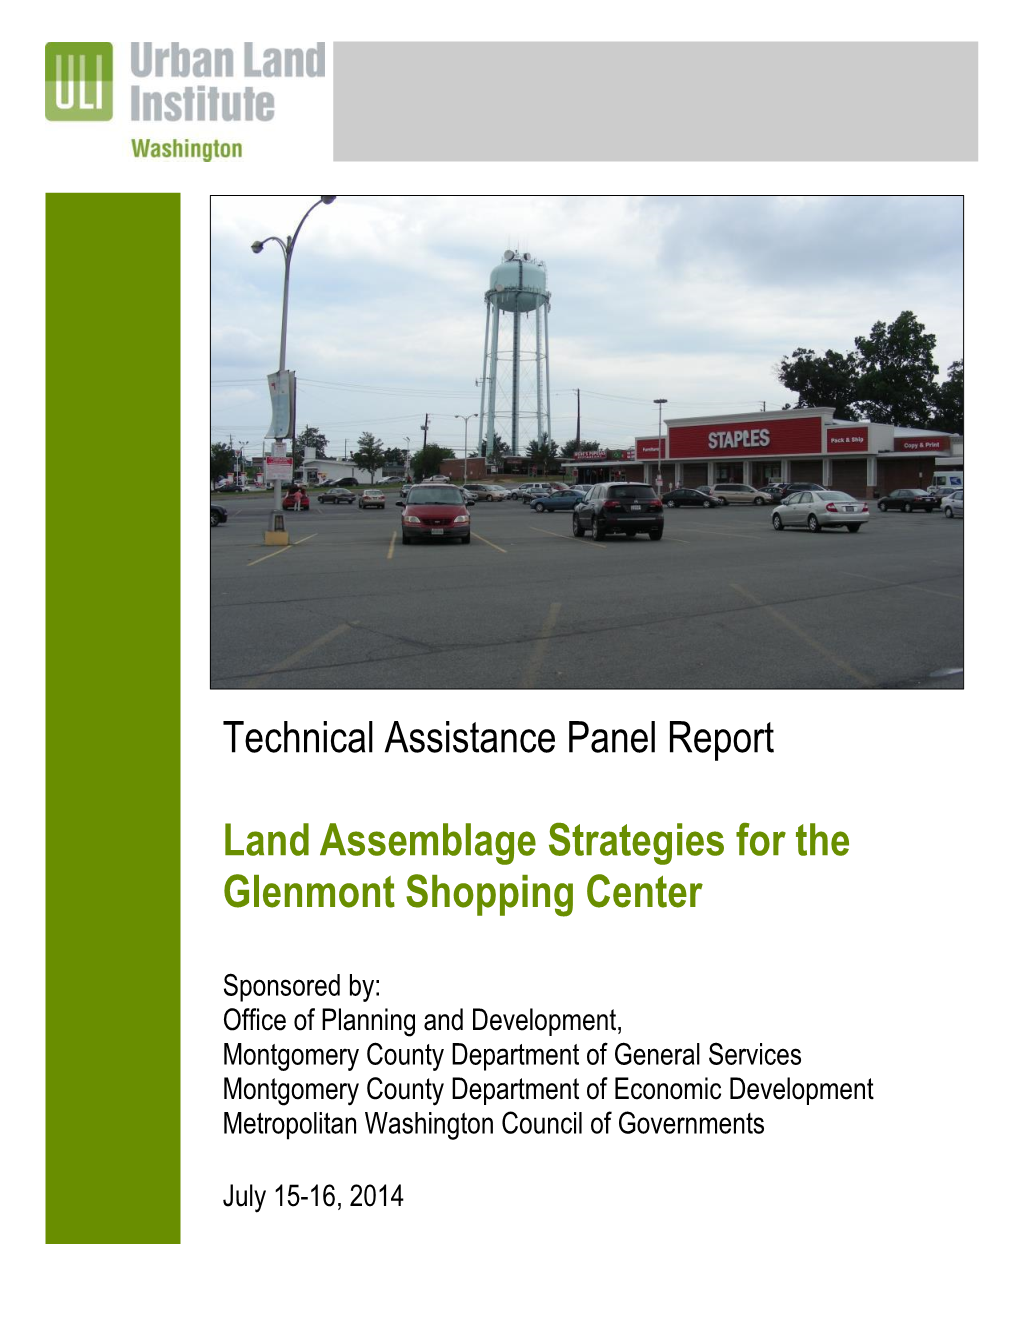 Land Assemblage Strategies for the Glenmont Shopping Center